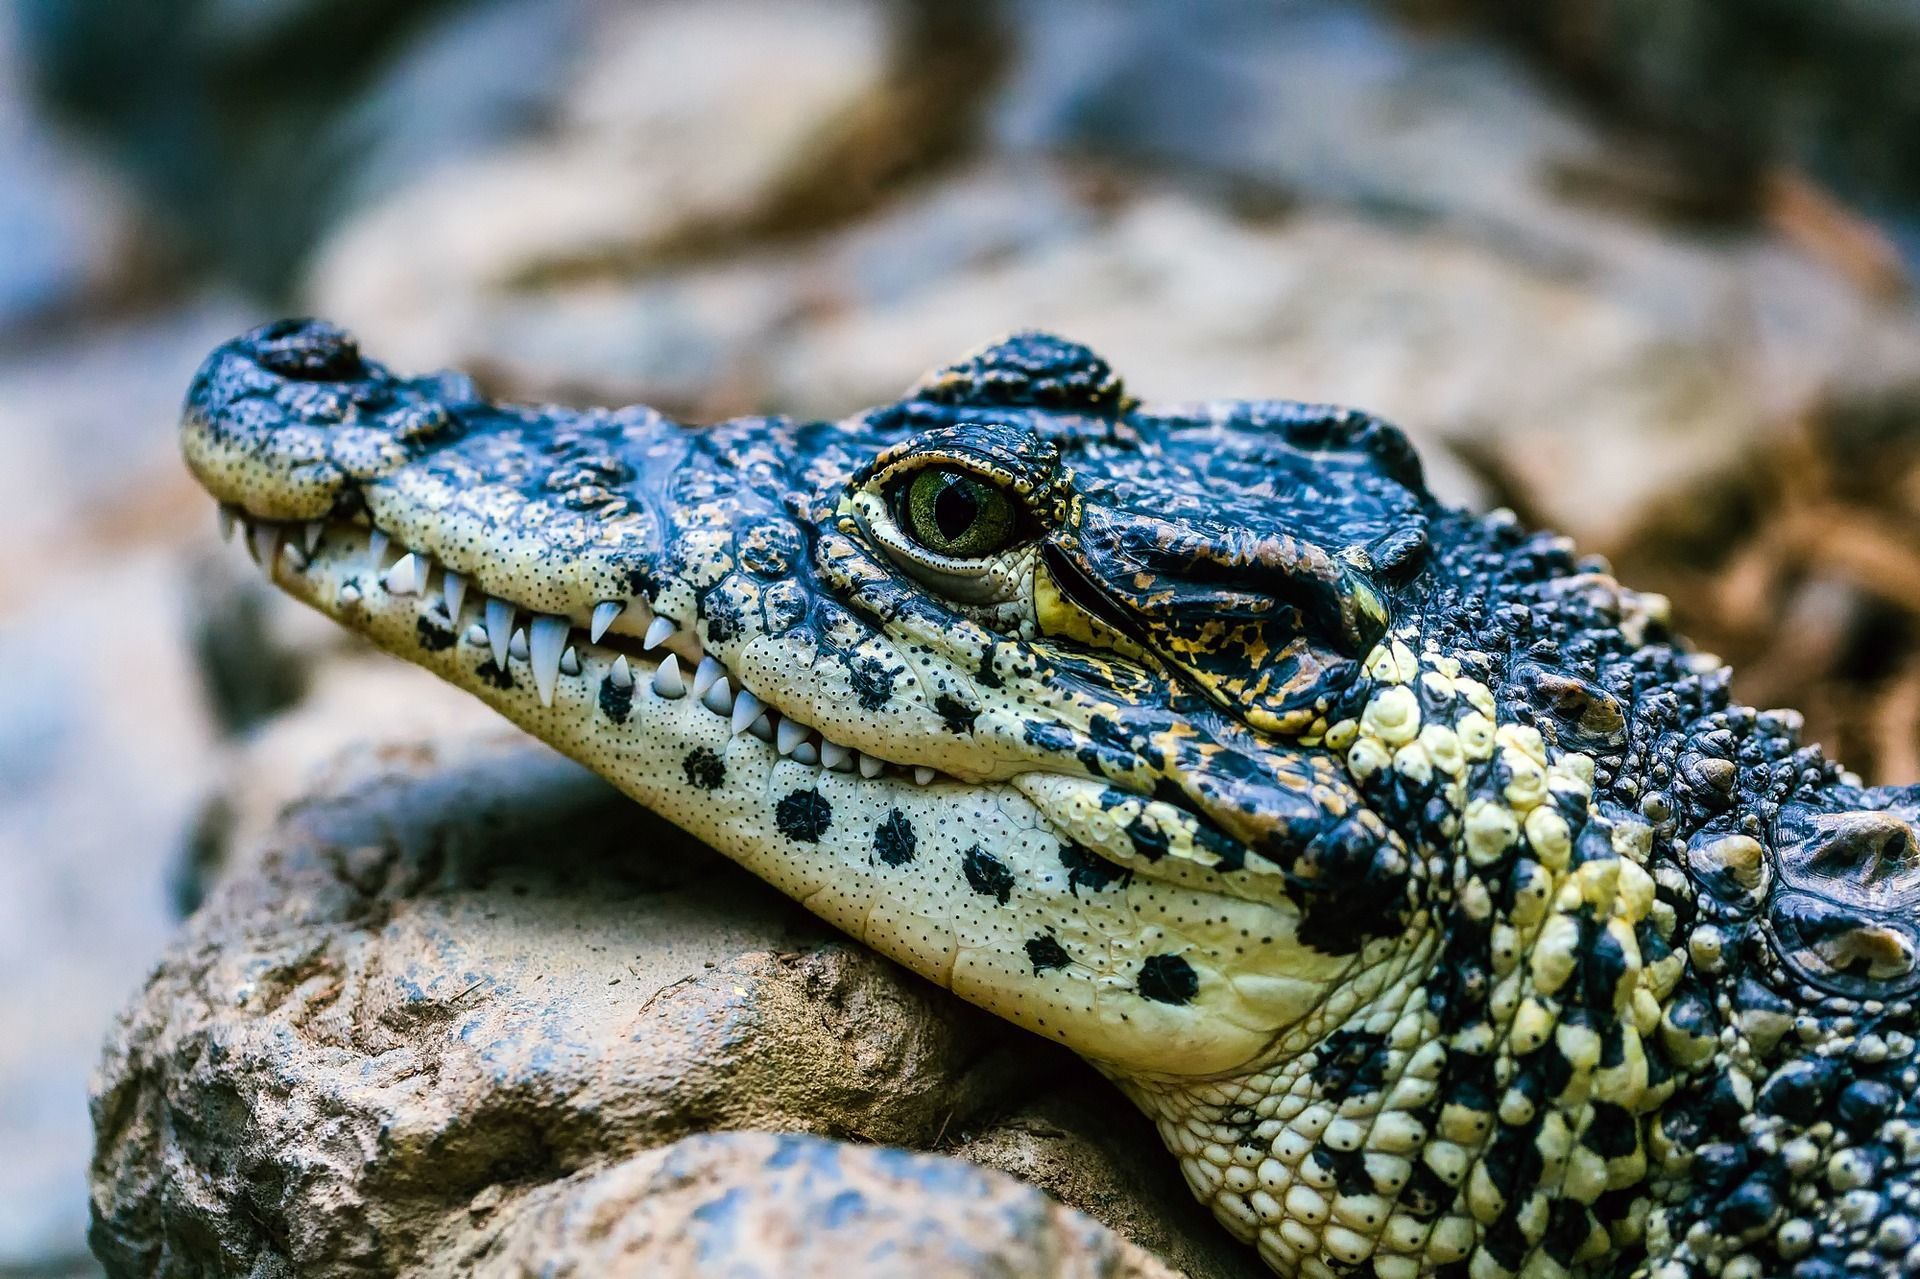 New study reveals reptiles and amphibians are most at risk among tetrapods